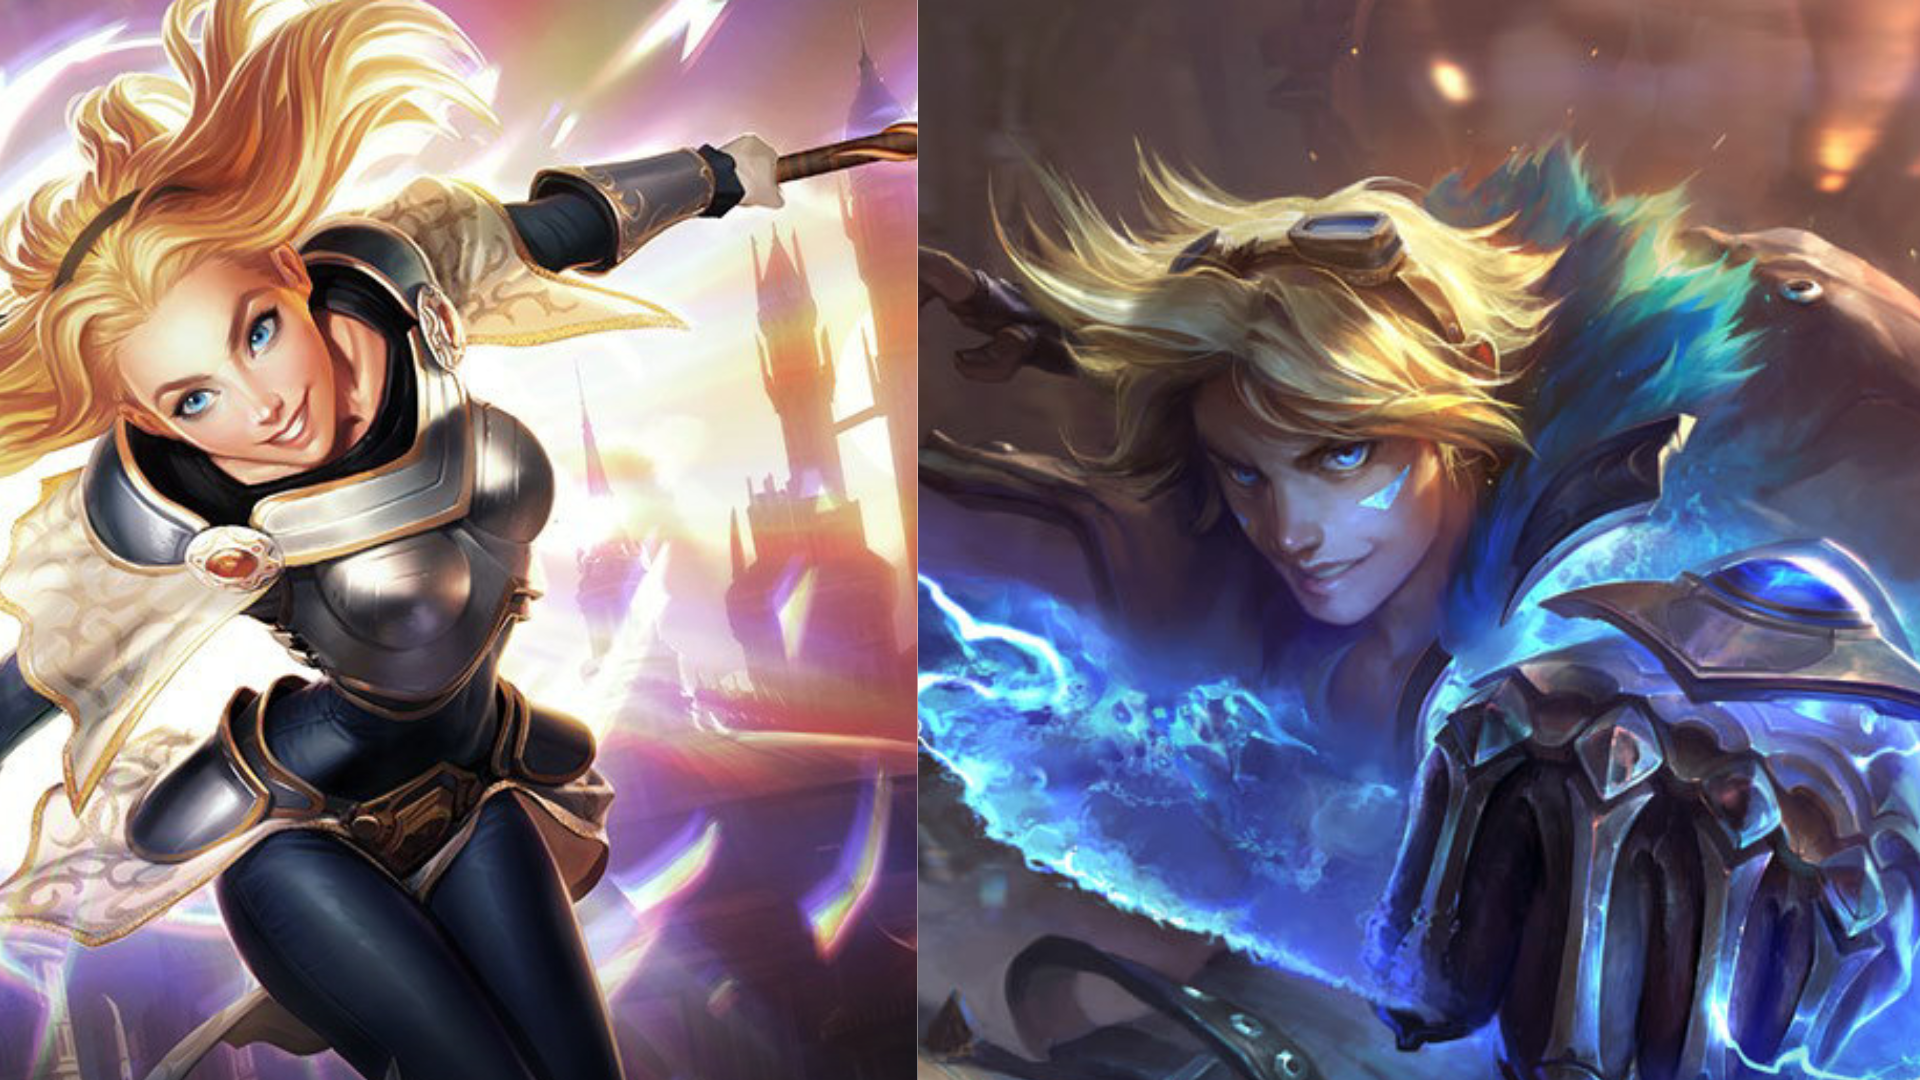 Lux and Ezreal